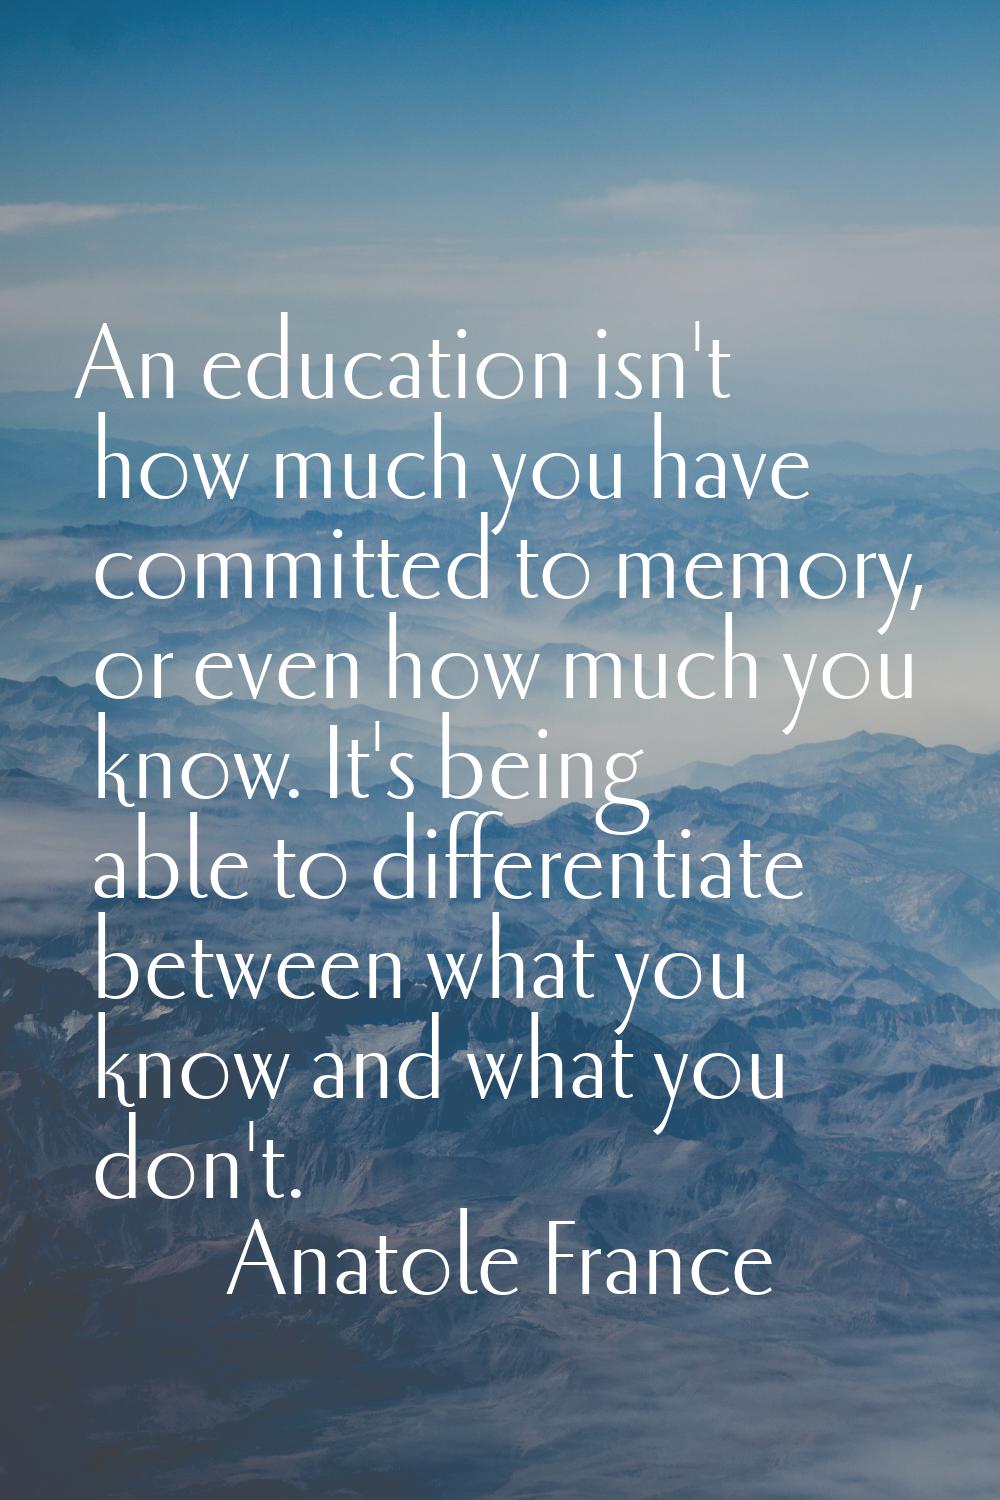 An education isn't how much you have committed to memory, or even how much you know. It's being abl